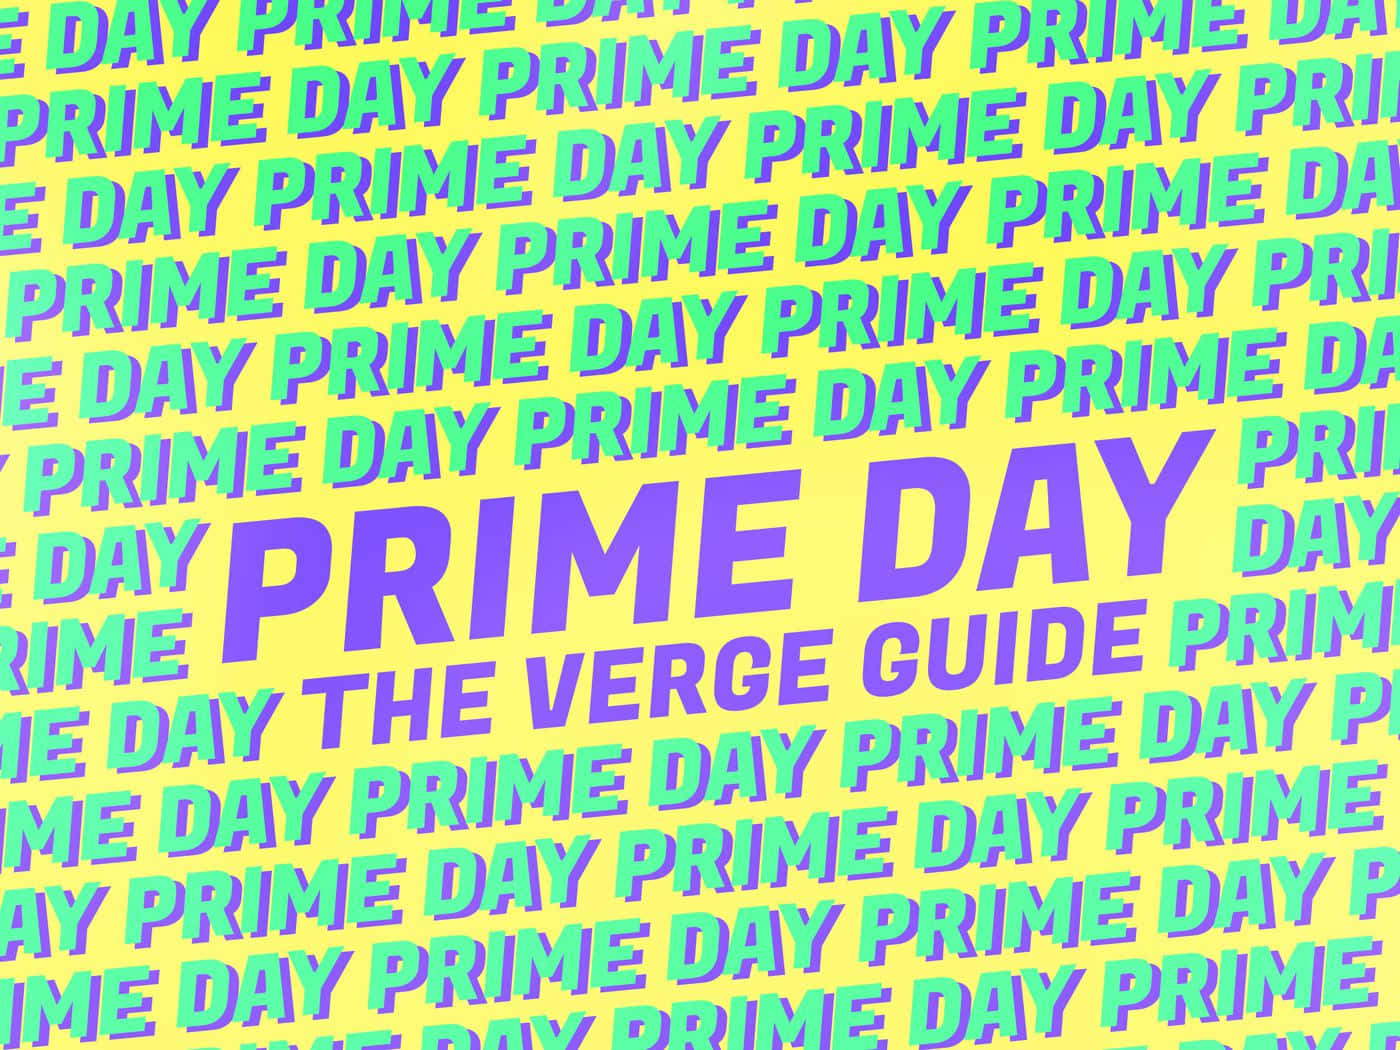 Prime Day The Verge Guide Pattern Wallpaper